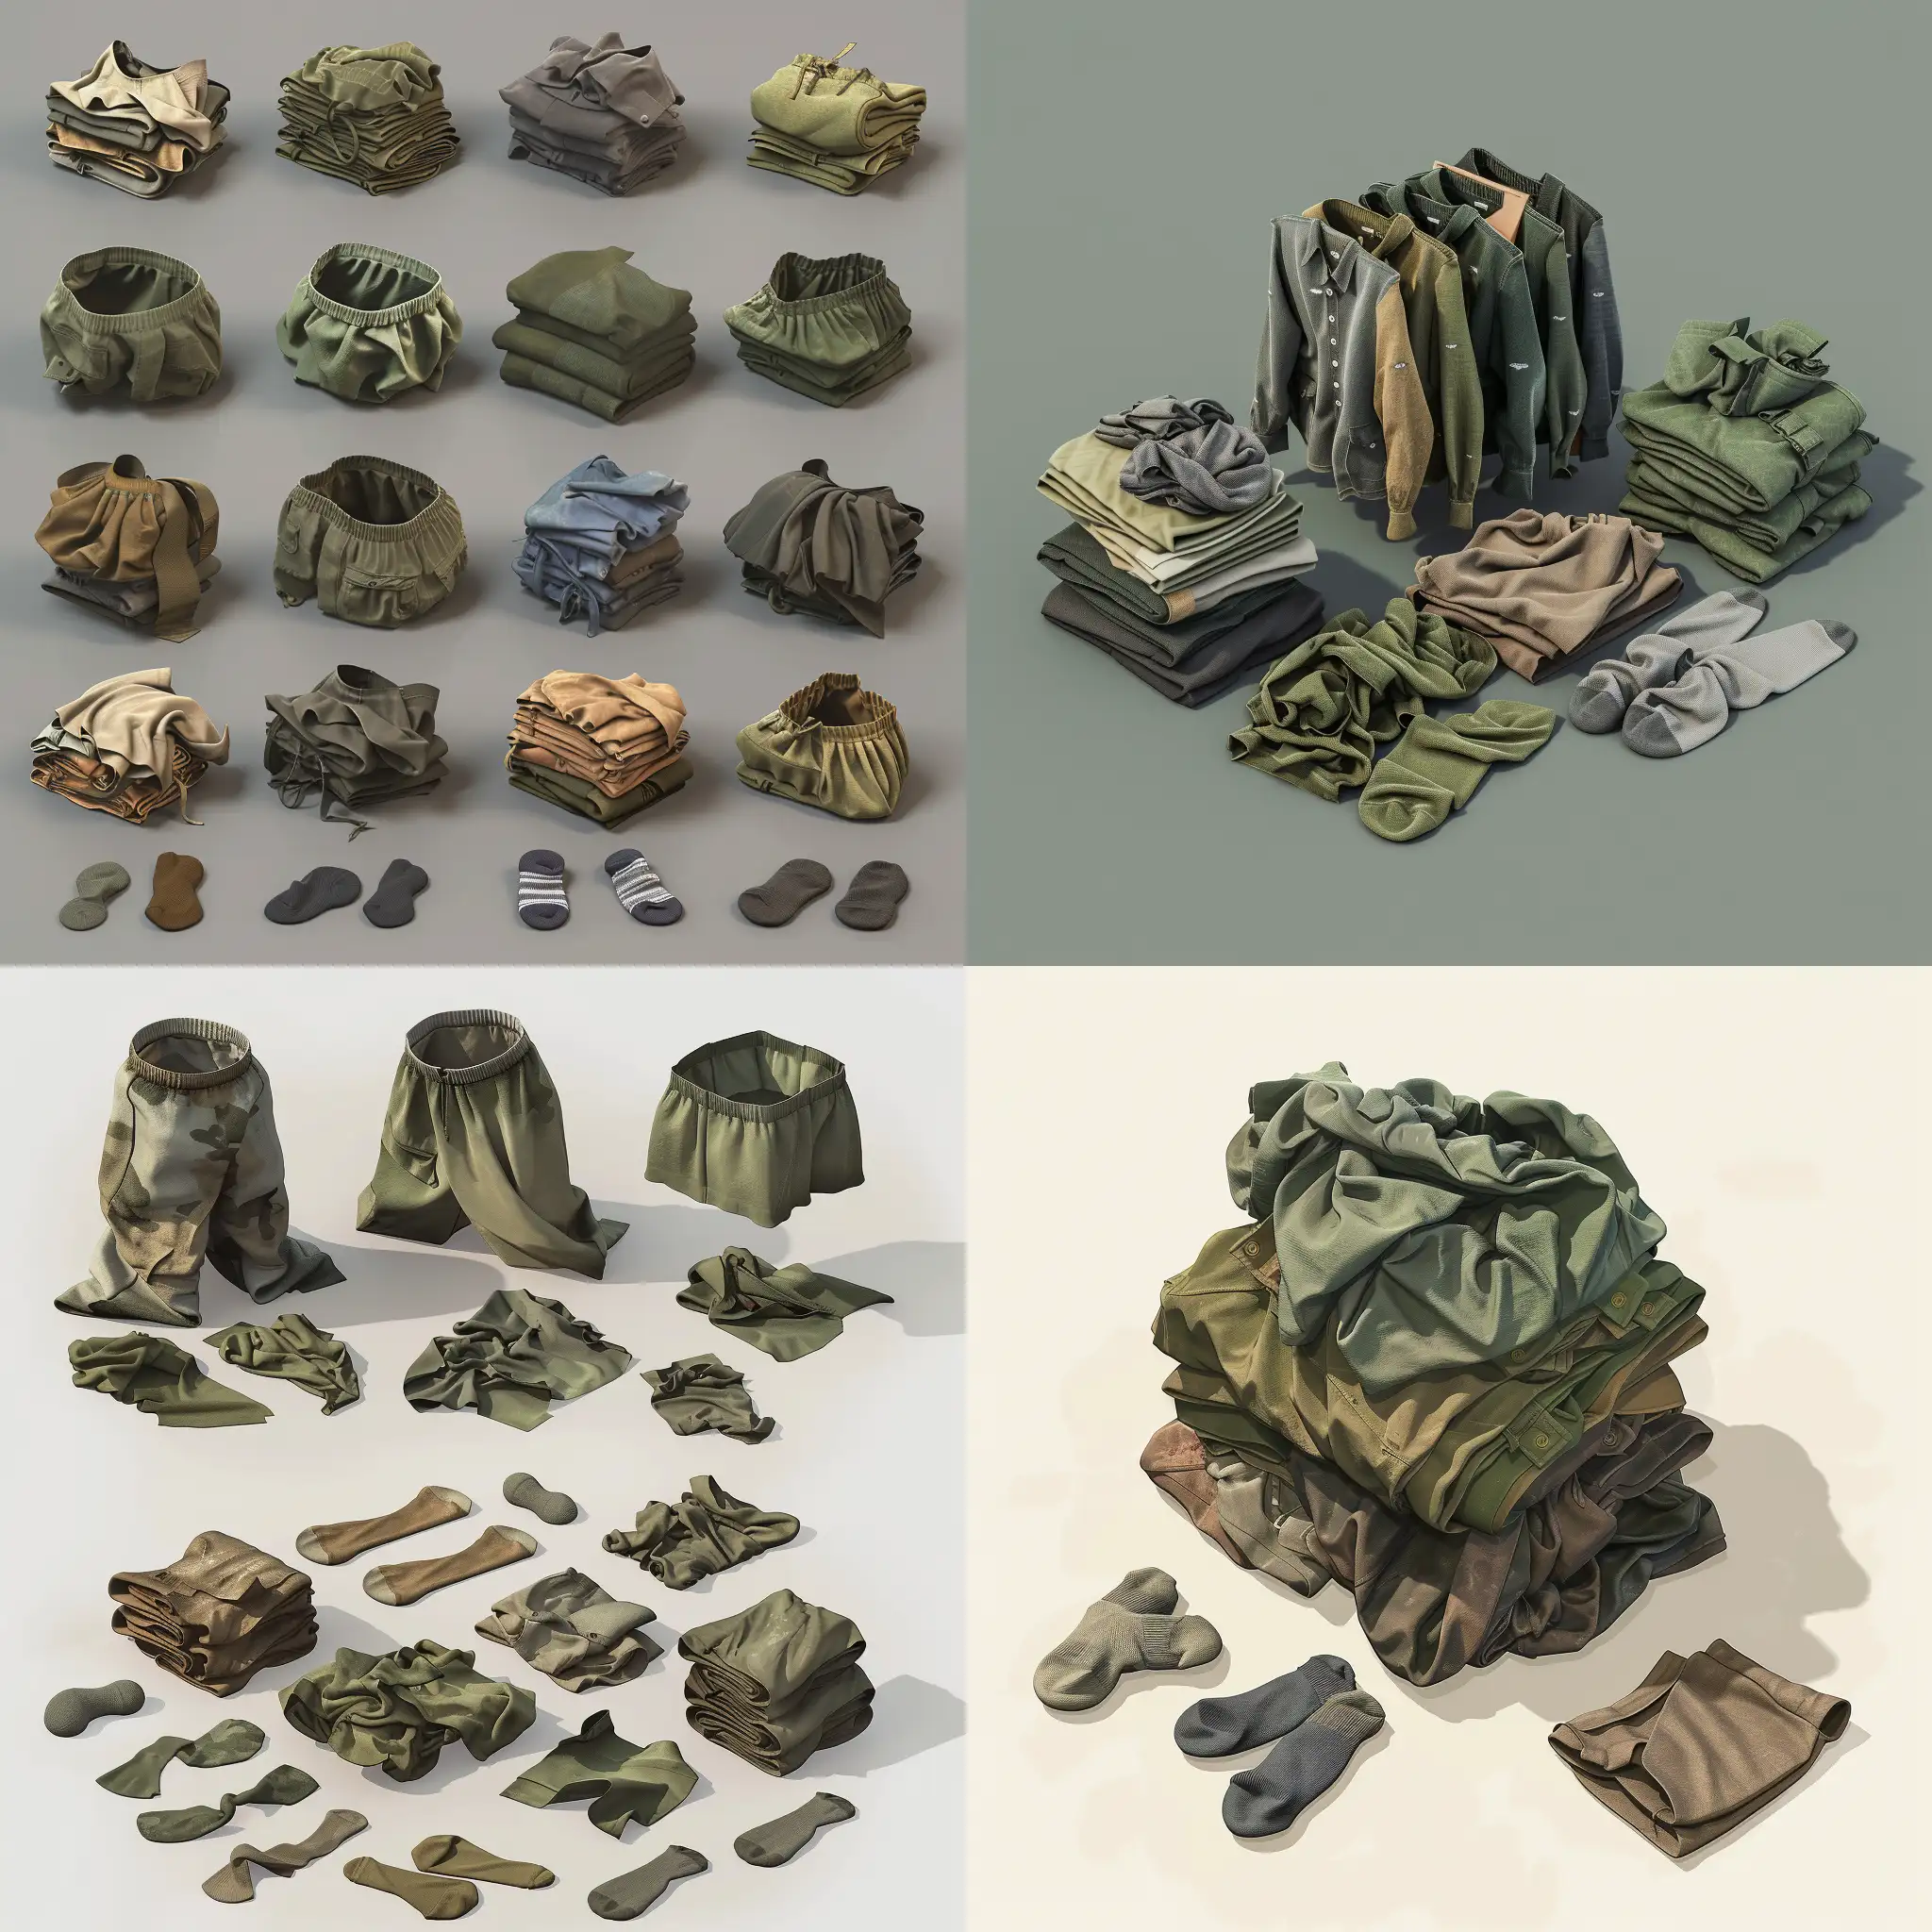 Realistic-Isometric-Military-Laundry-Pile-Old-Worn-Socks-and-Underpants-3D-Render